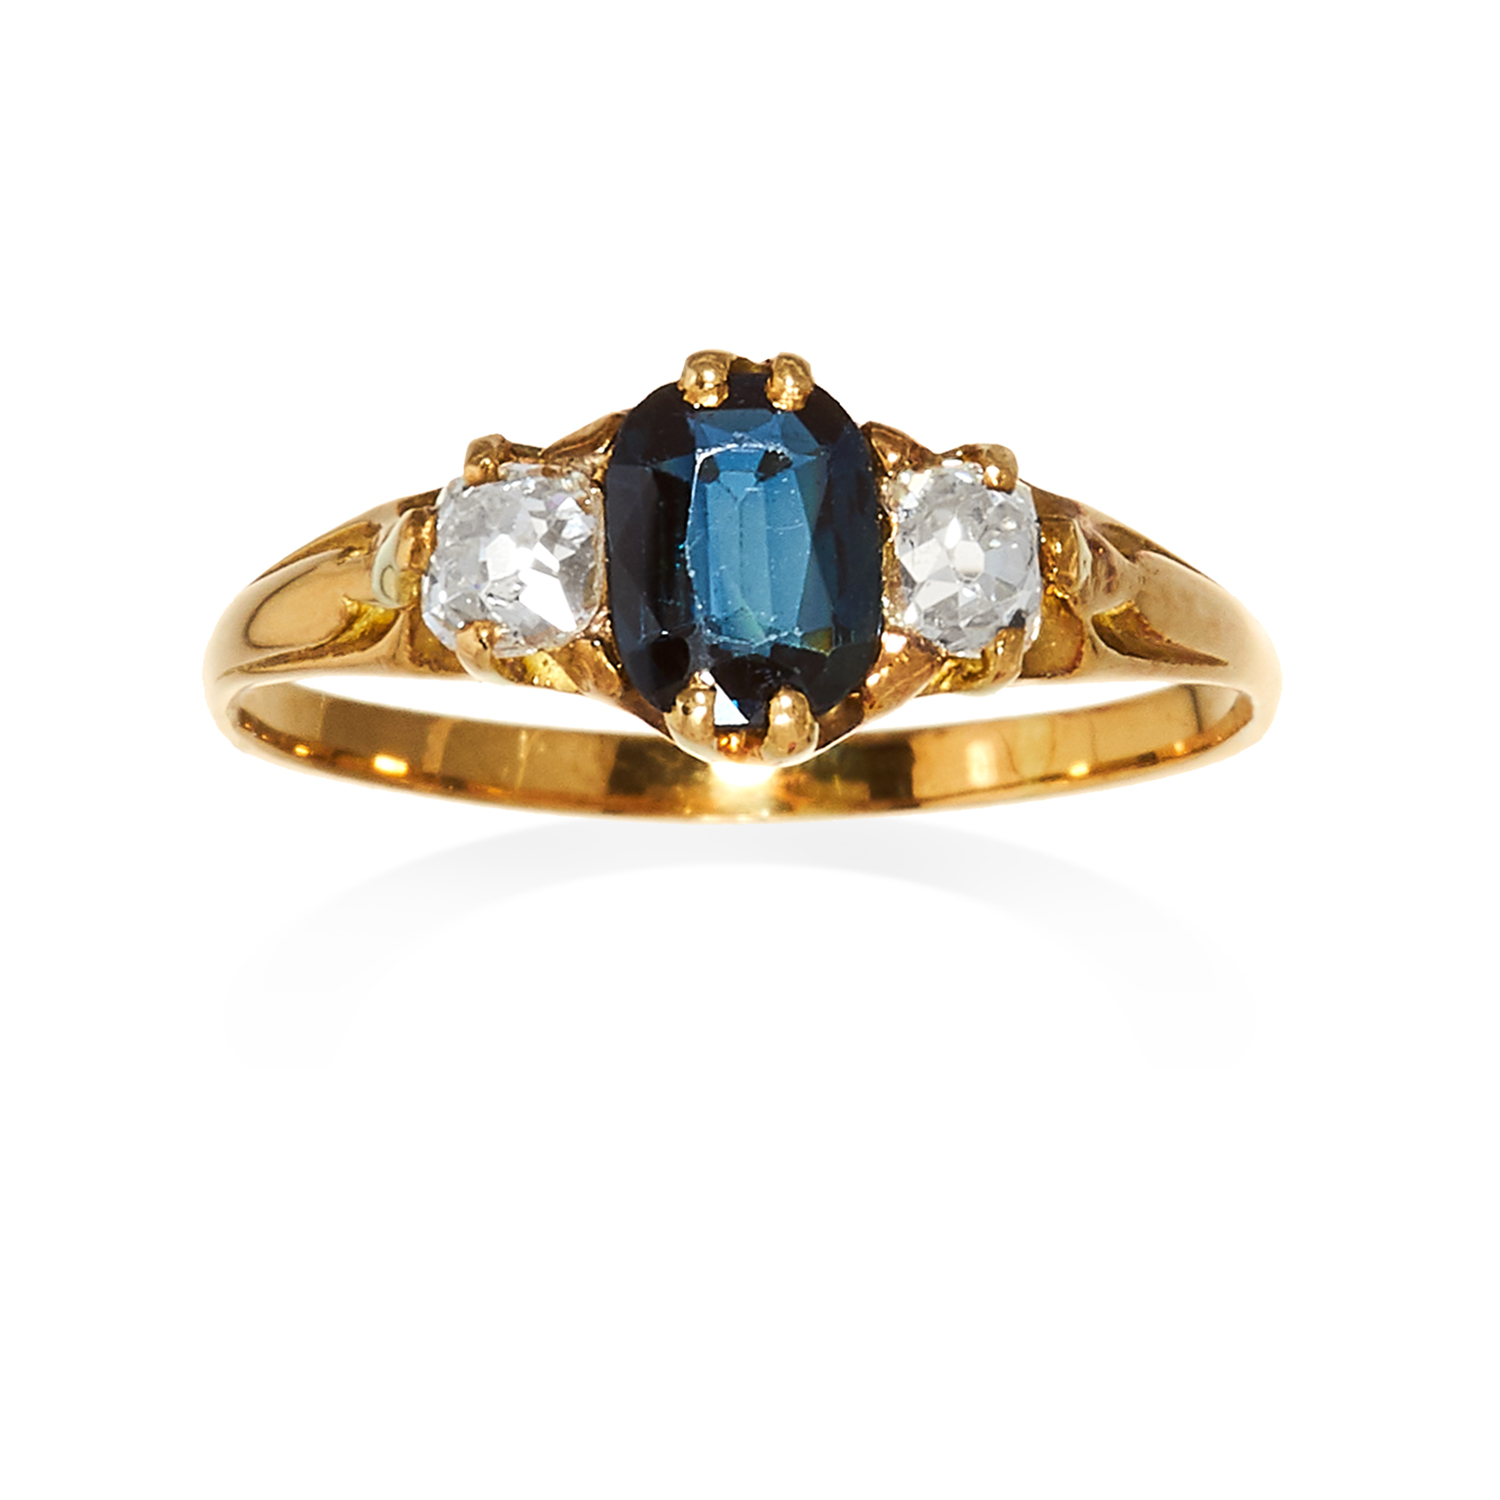 AN ANTIQUE SAPPHIRE AND DIAMOND THREE STONE RING in high carat yellow gold, the oval cut sapphire